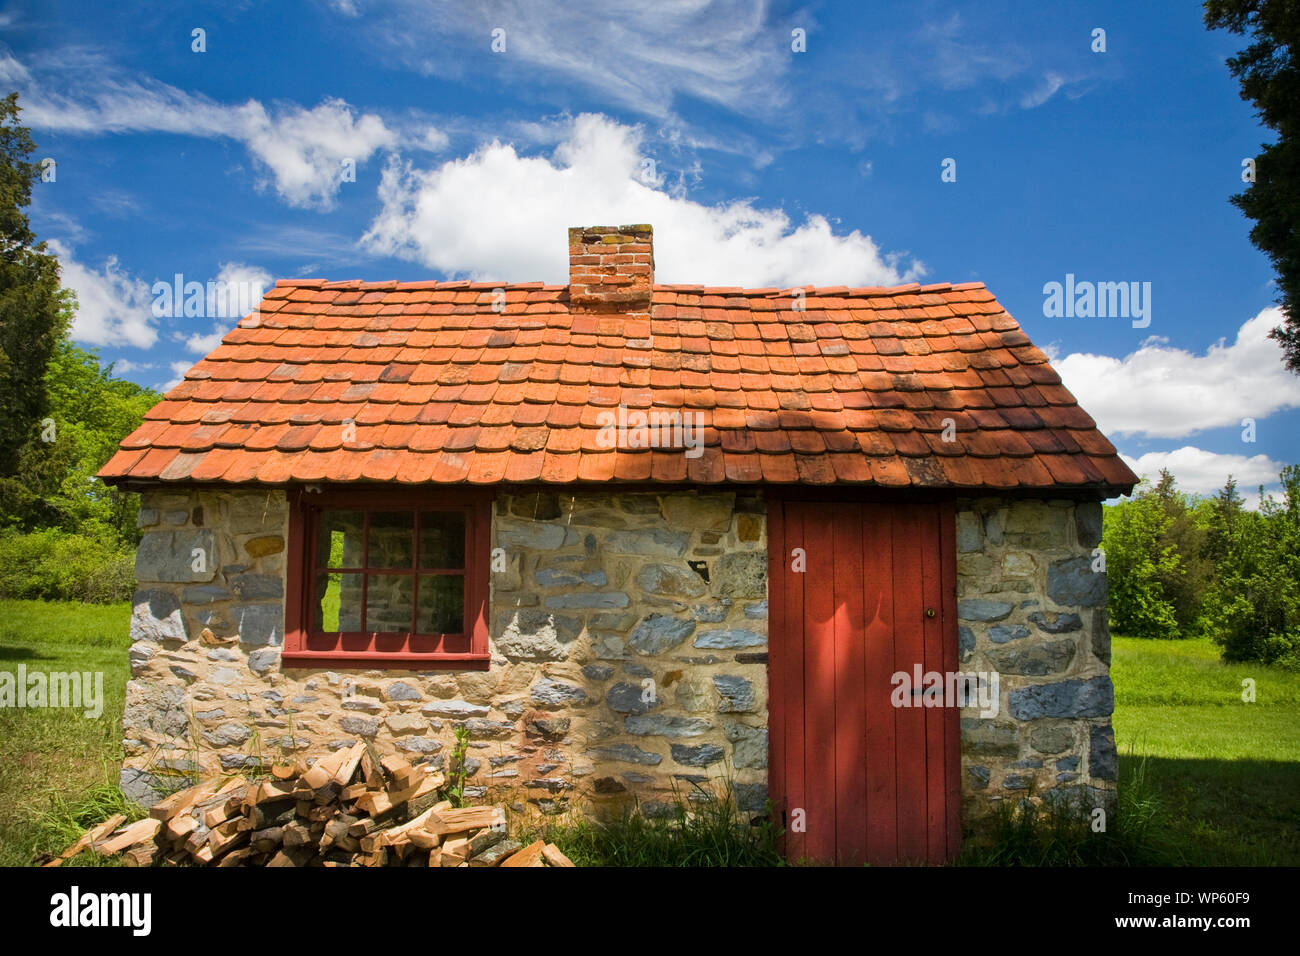 Historic stone Smokehouse with a vintage tile roof at the Daniel Boone Homestead, Berks Co., Pennsylvania, USA, US Birdsboro, Pa images, pioneer Stock Photo